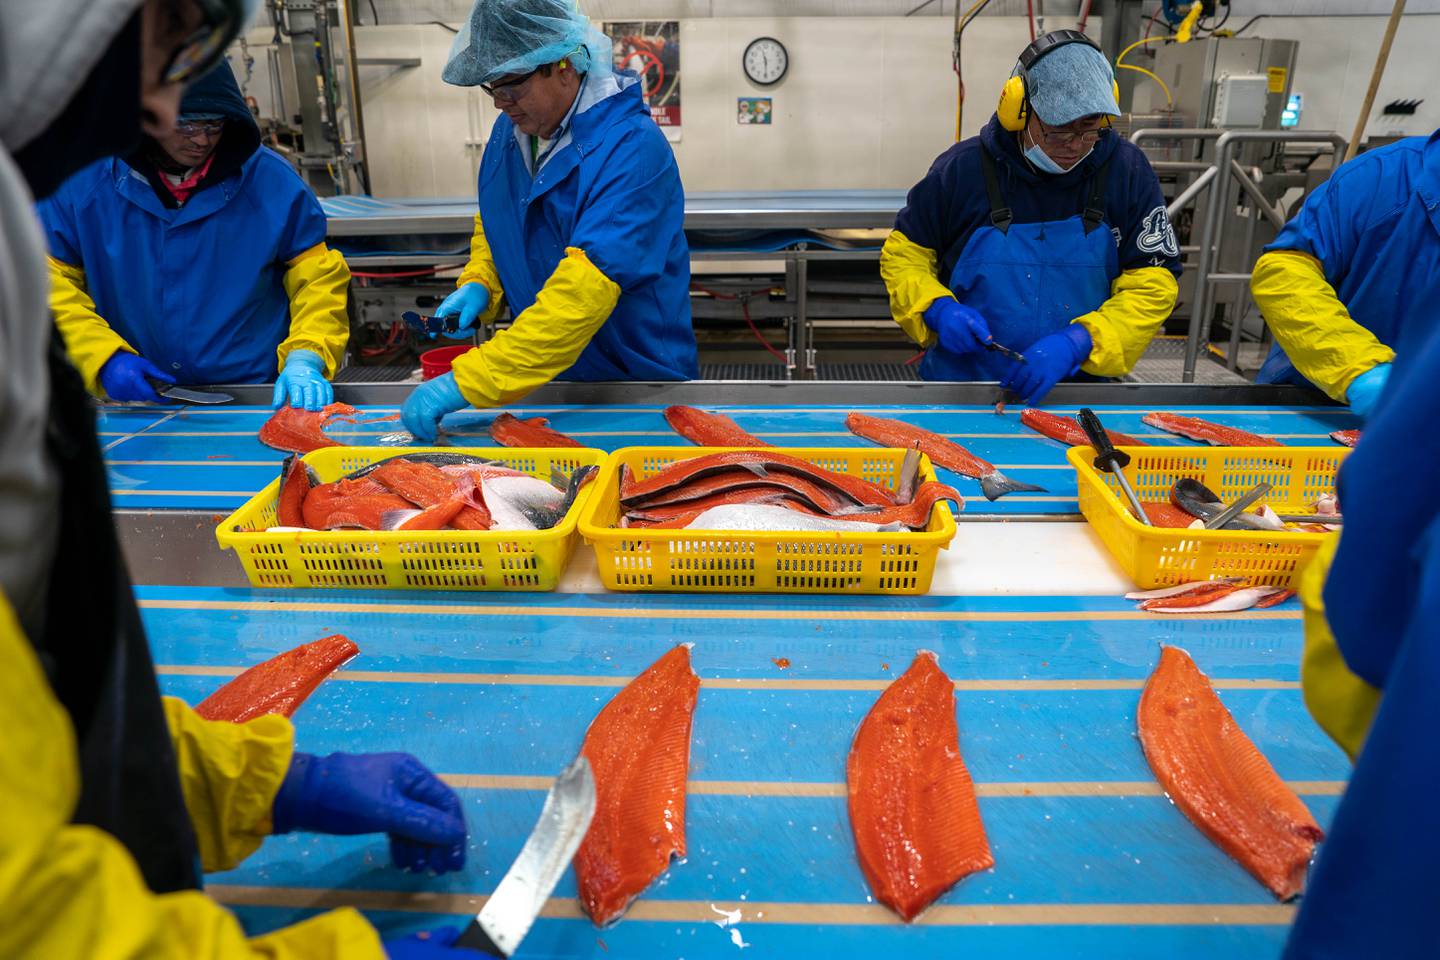 Bristol Bay, Naknek, Trident, Trident Seafoods, cannery, fish processing, salmon